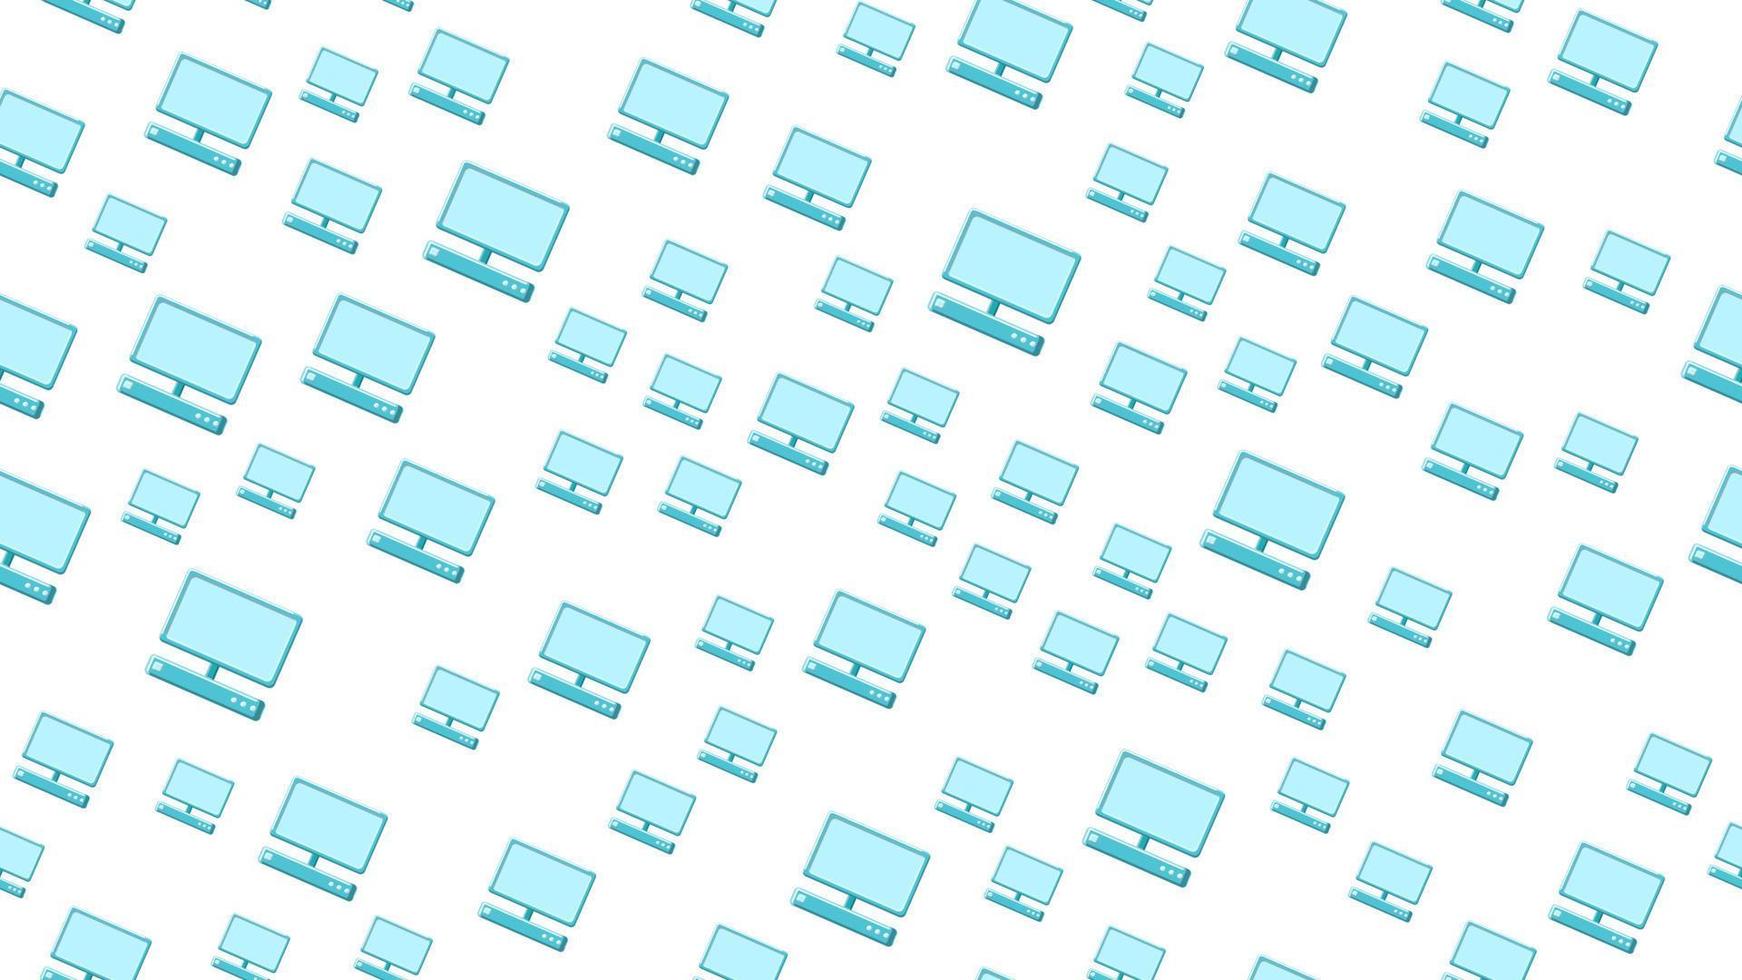 Seamless pattern texture of endless repetitive modern digital laptop computers with monitors on white background. Vector illustration